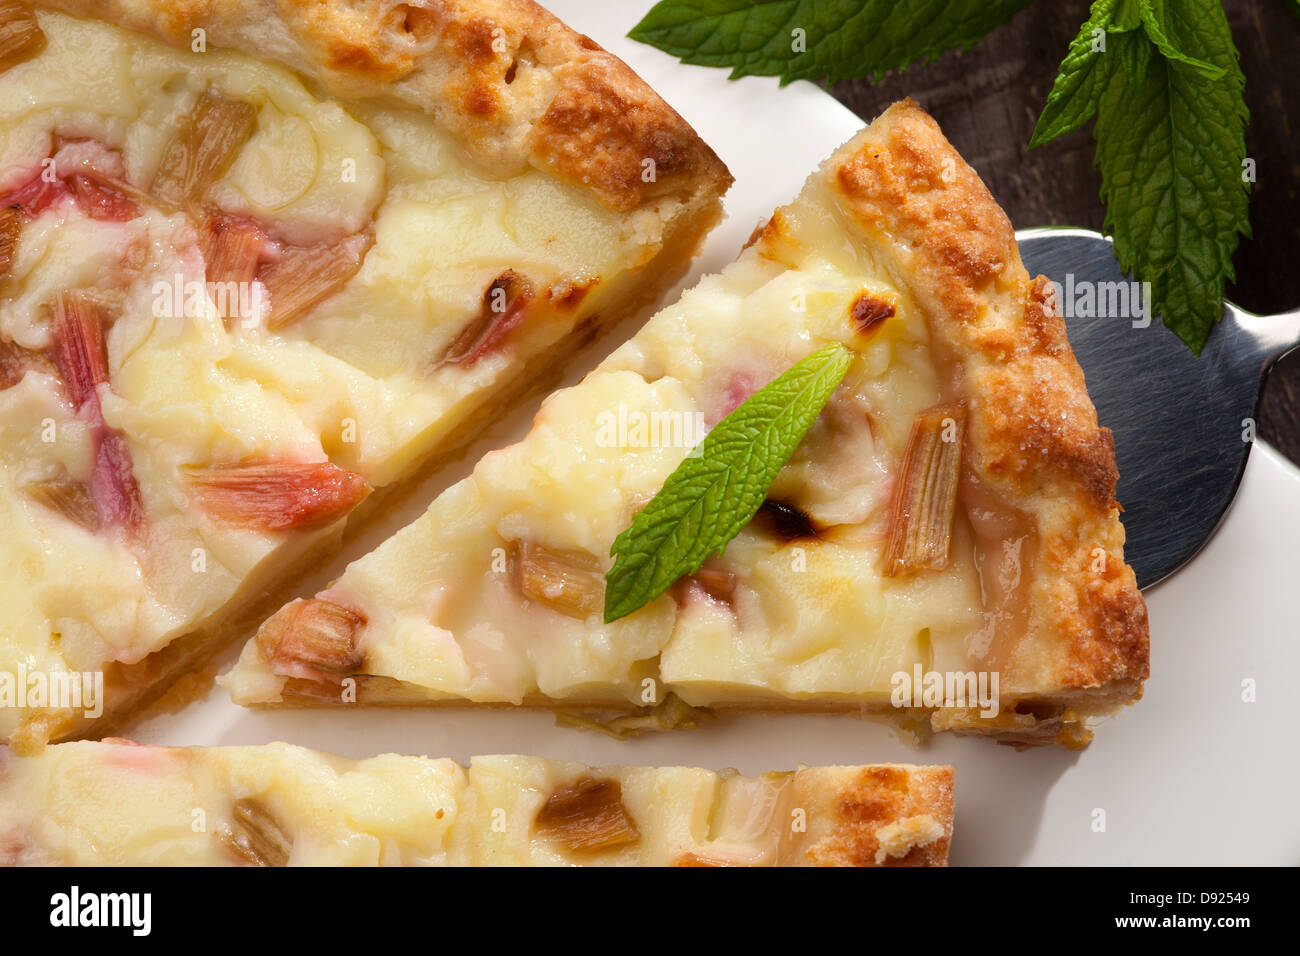 piece of tart with rhubarb and pudding, fresh green mint leaf Stock Photo